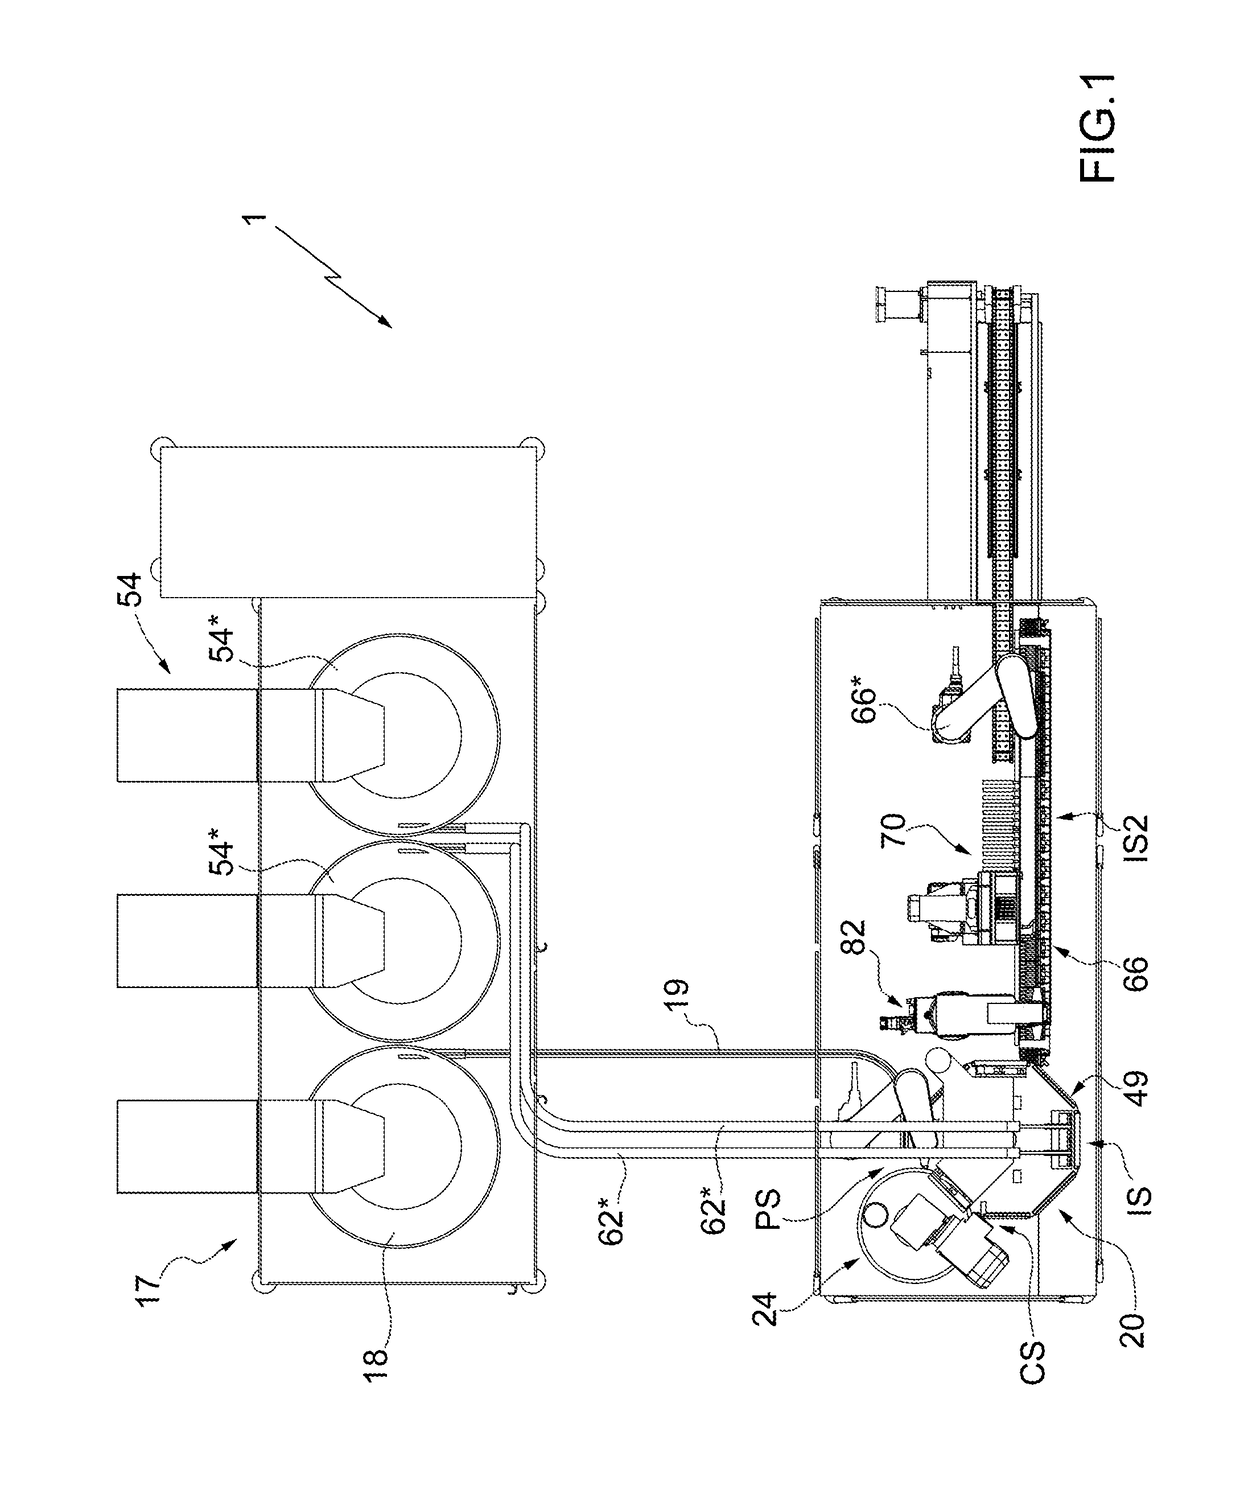 Machine for Producing Substantially Cylindrical Articles